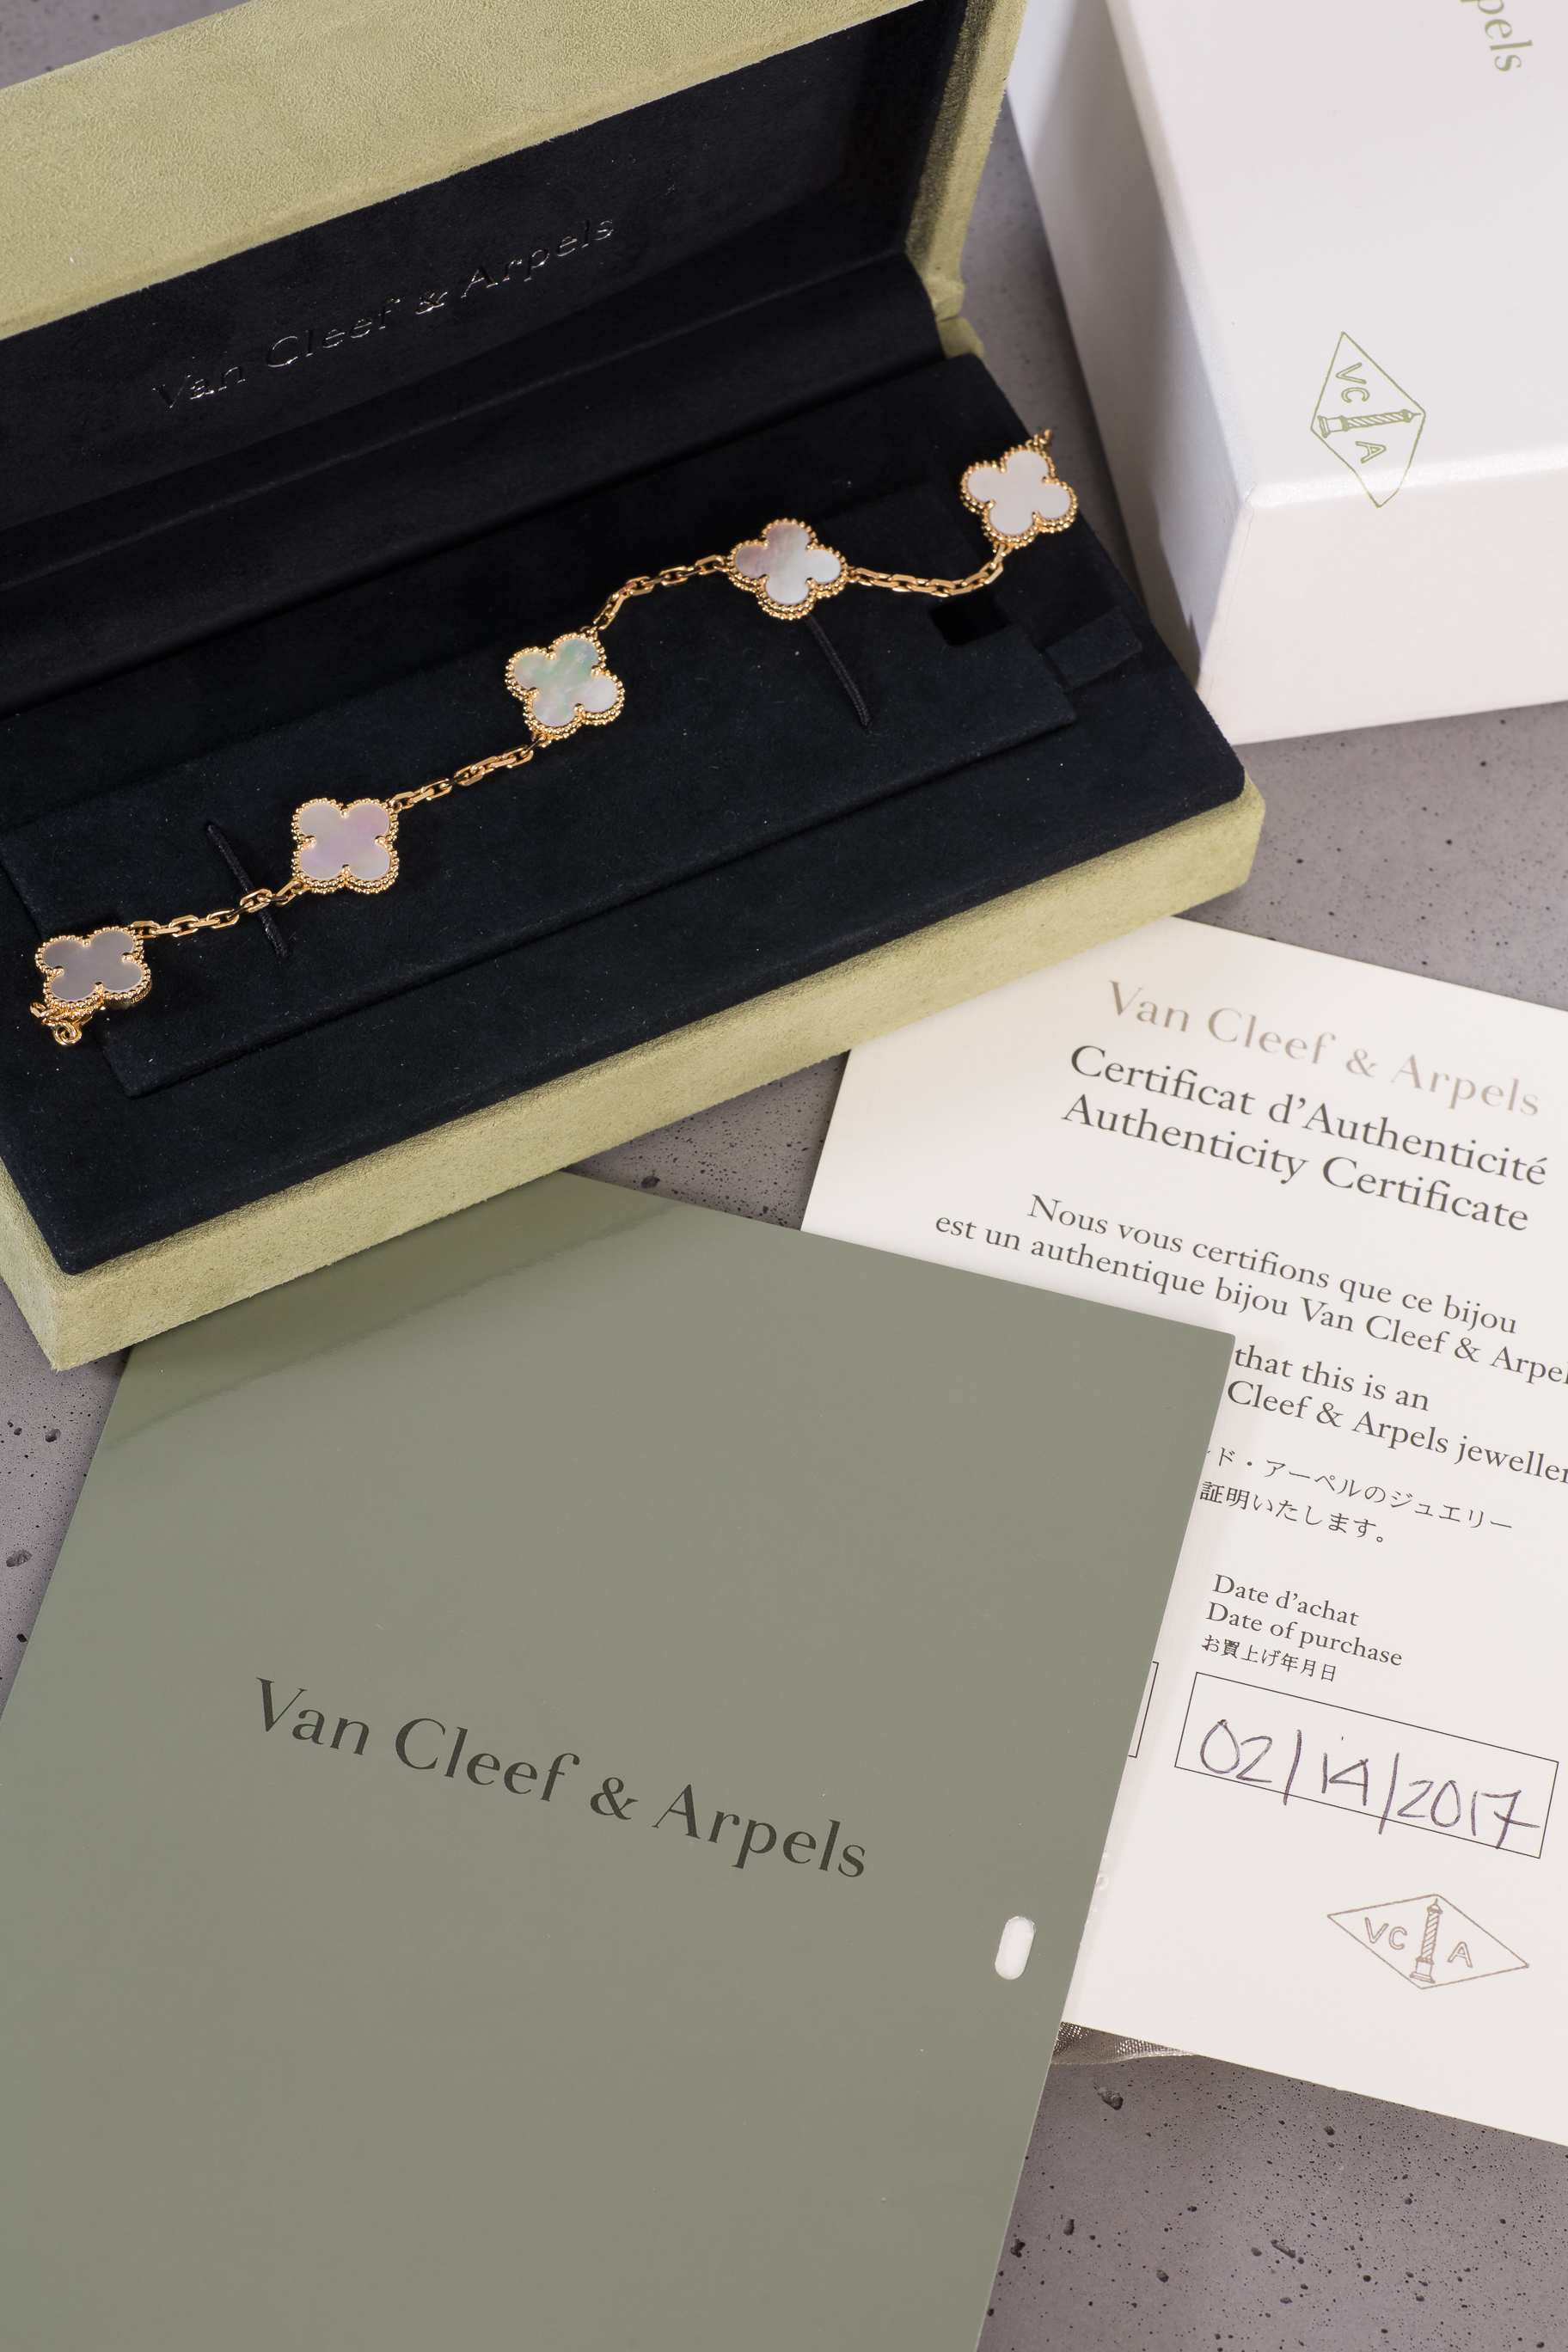 van cleef and arpels certificate of authenticity